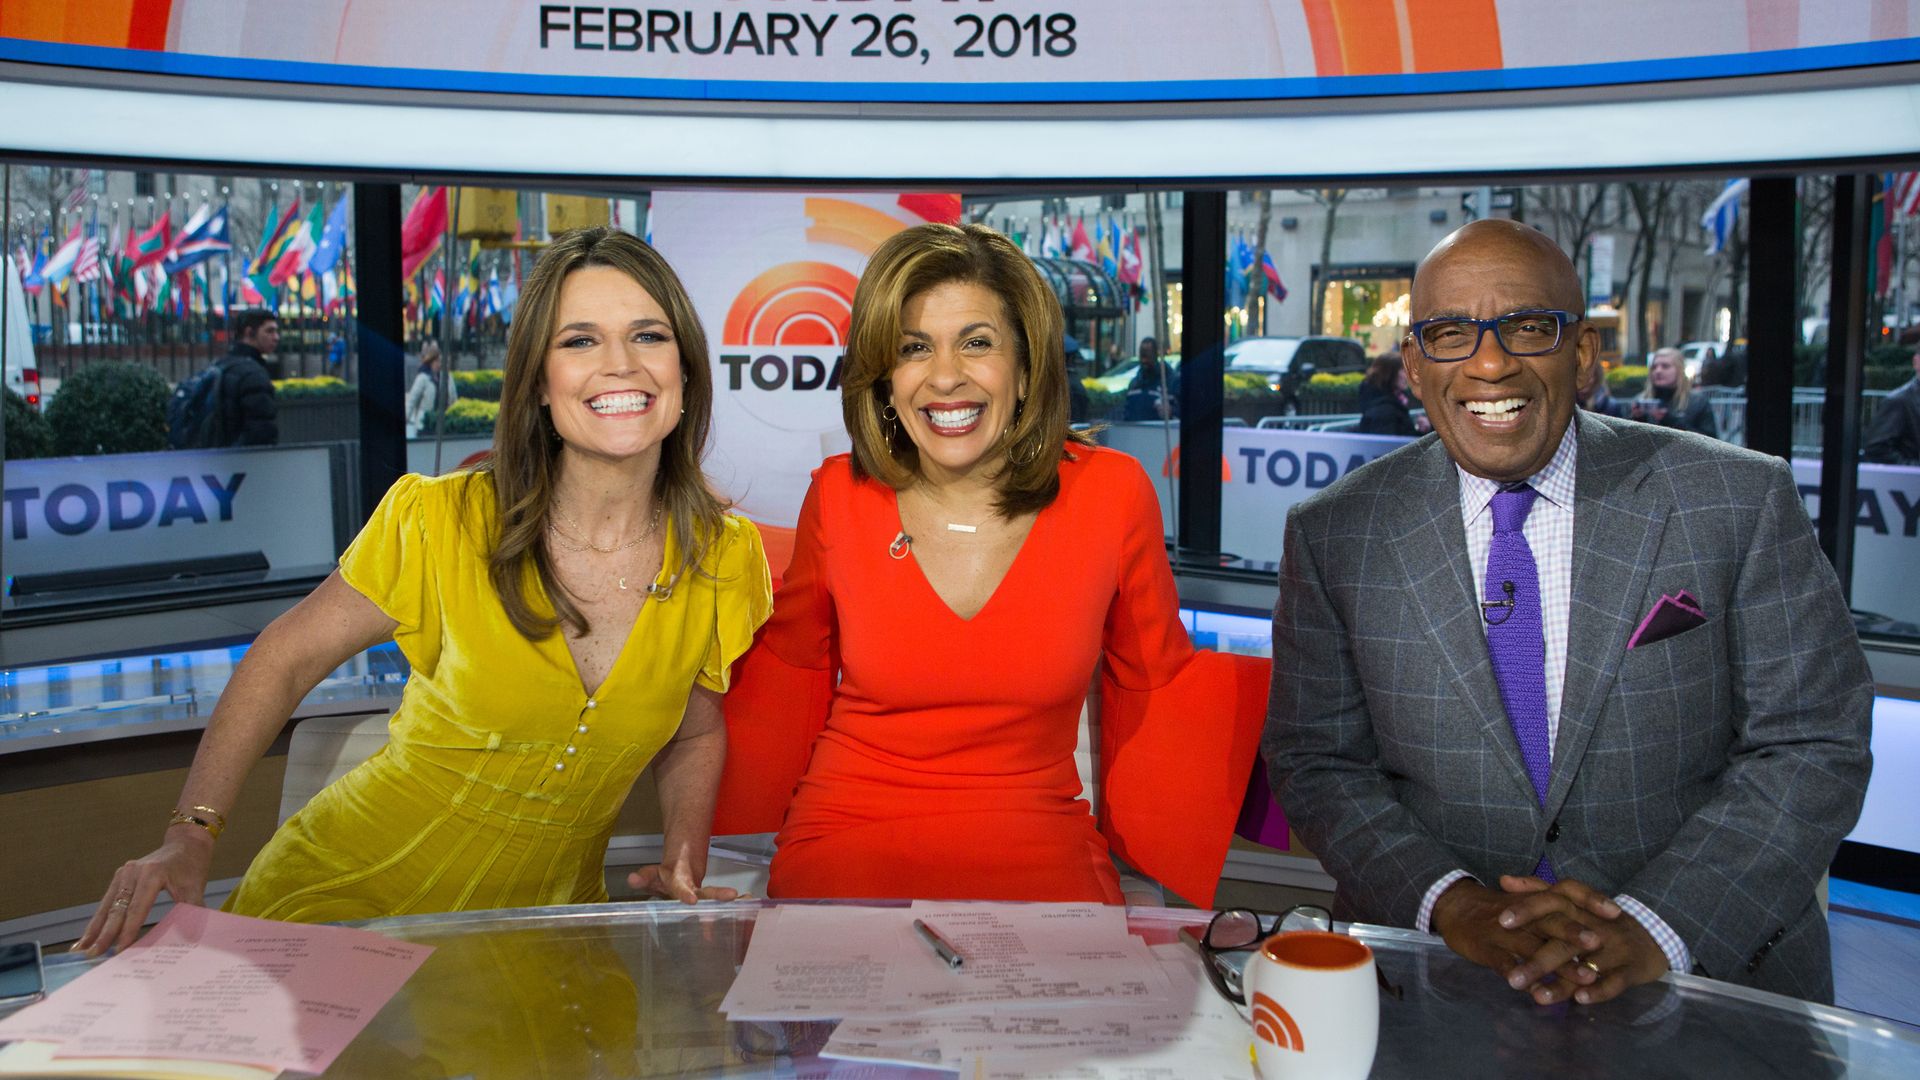 Al Roker shares glimpse of his Today office featuring Hoda Kotb and